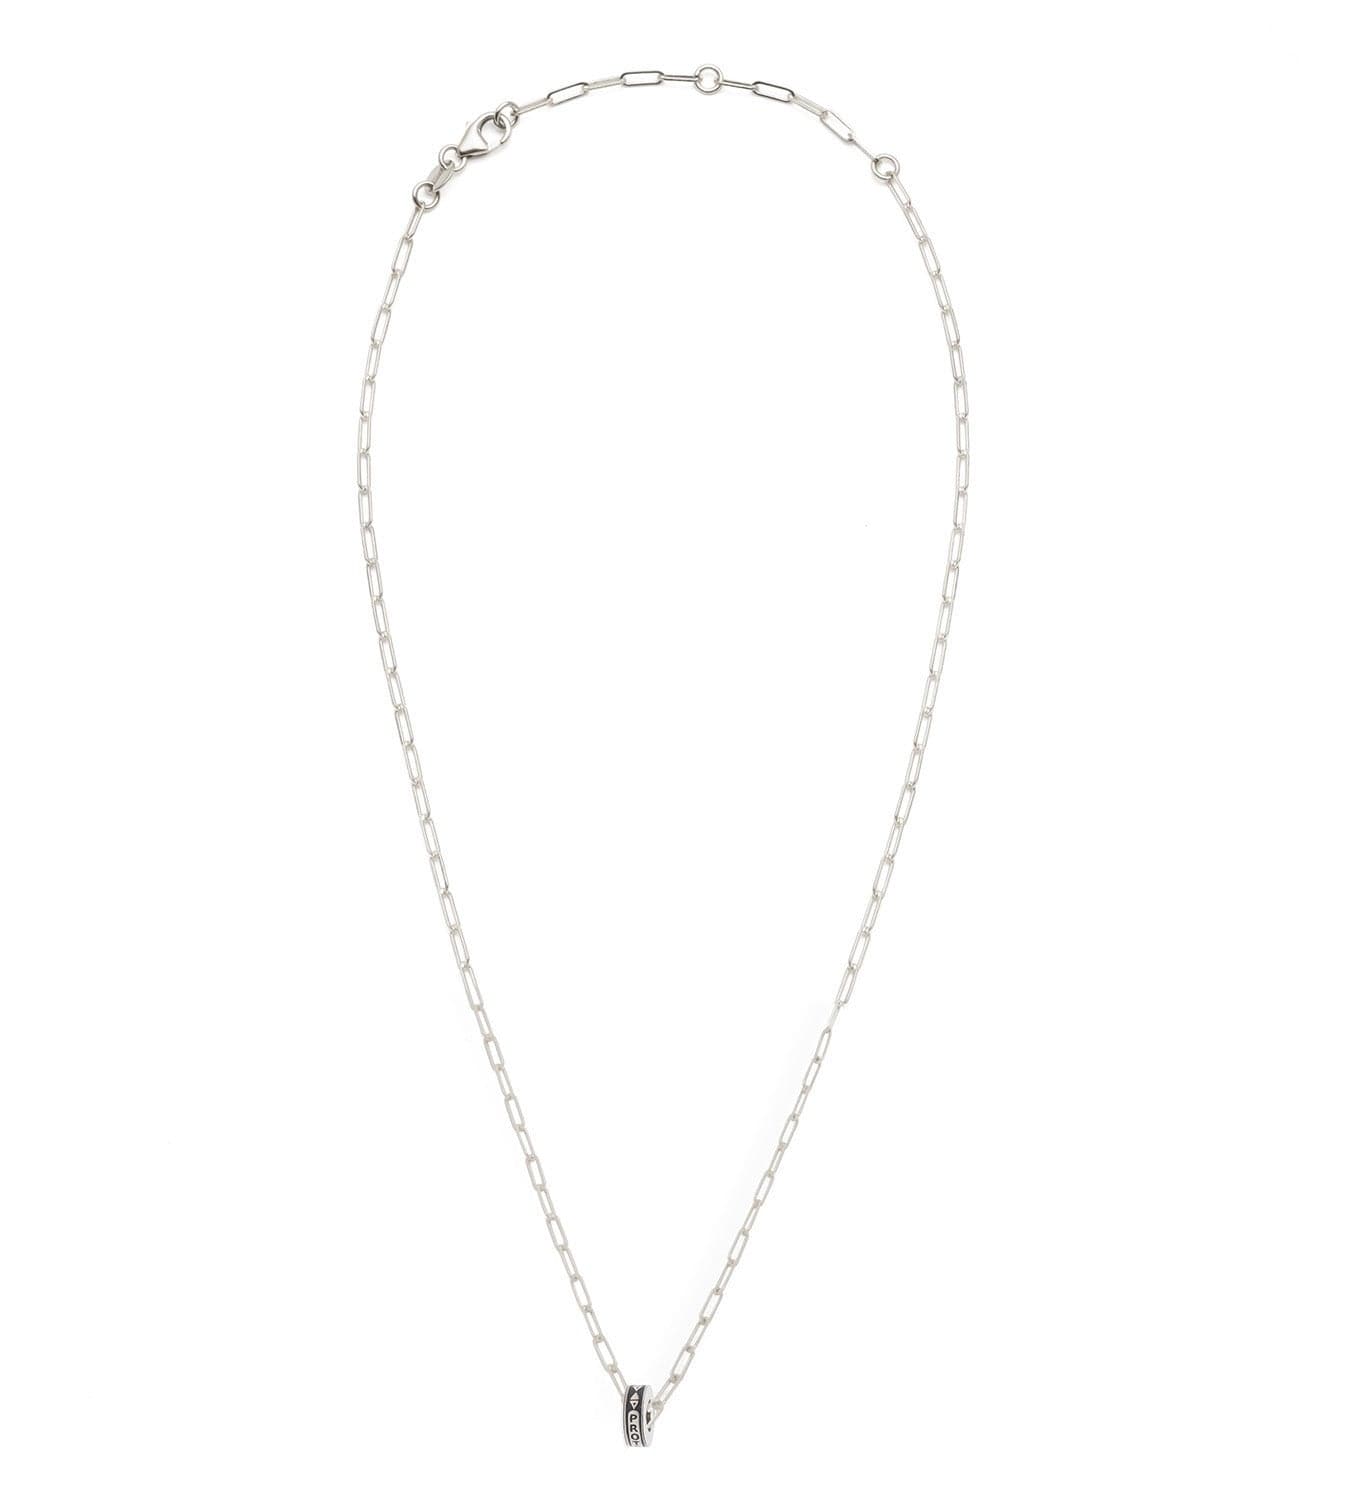 Protection : Heart Beat Super Fine Clip Chain Necklace White Gold